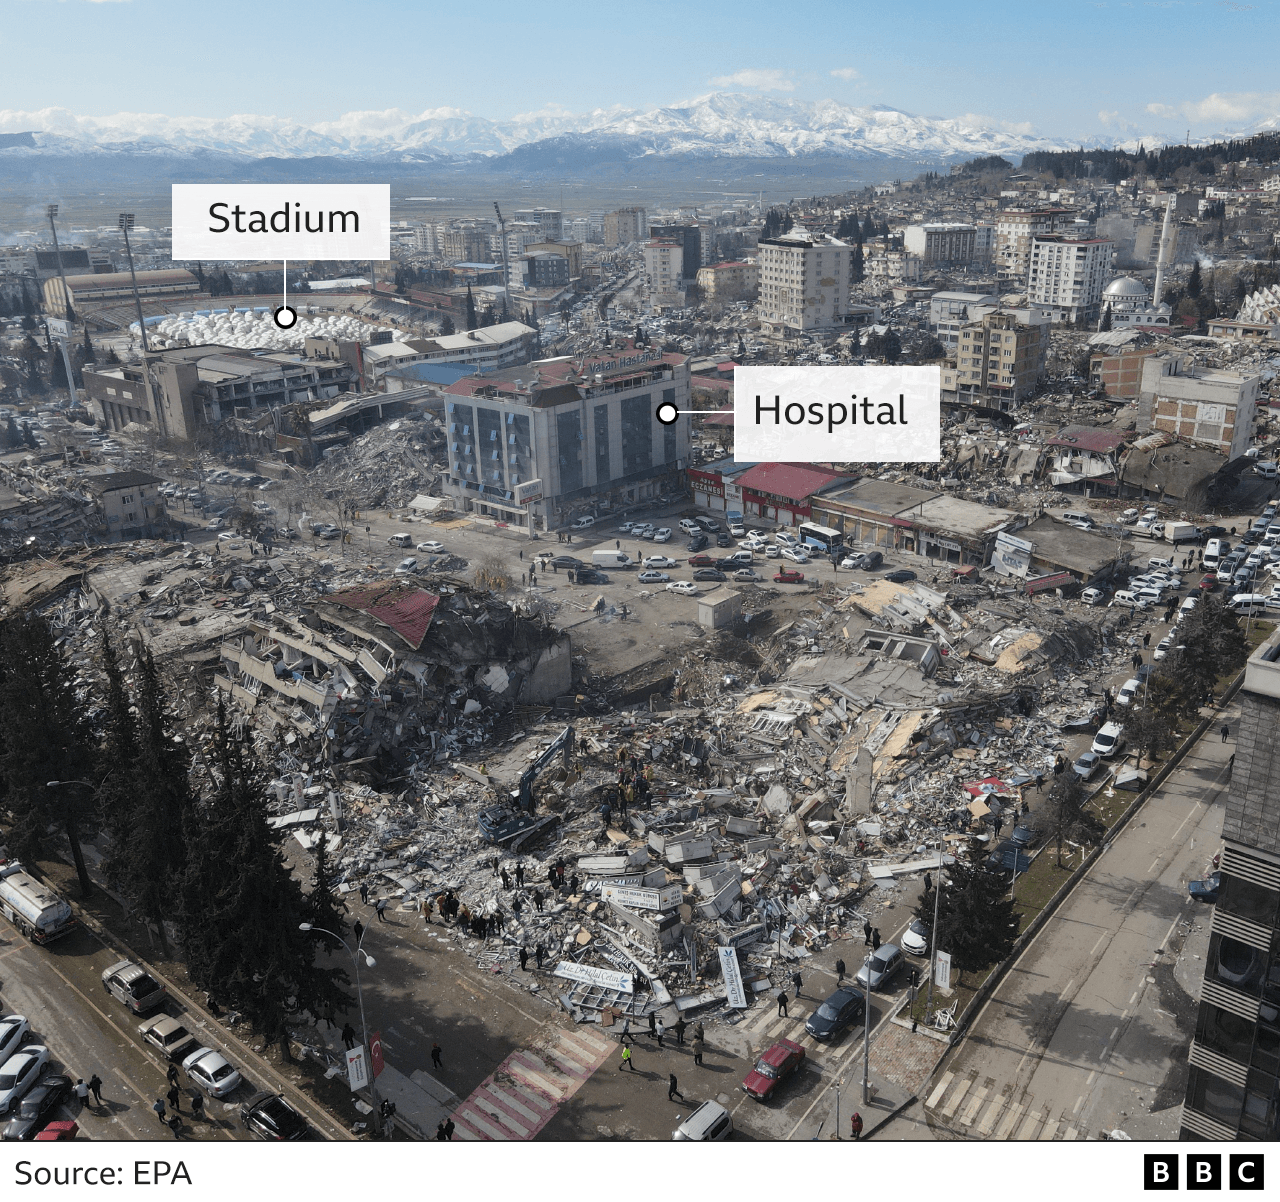 An aerial view looking back over the city showing the damaged hospital block still standing amid the ruins and the tent city in the stadium in the background